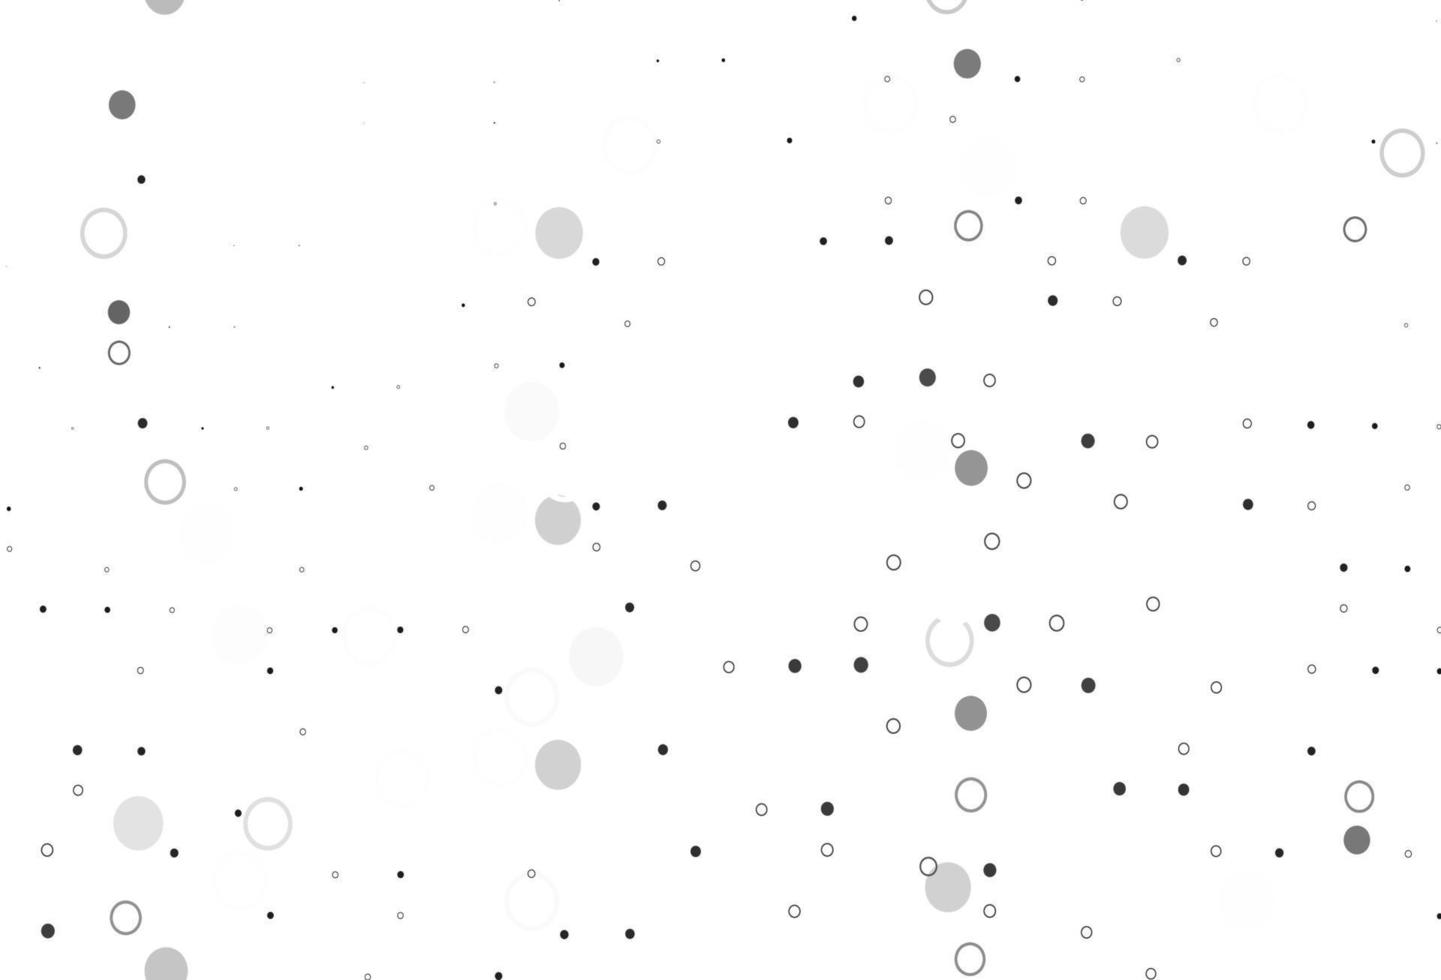 Light Silver, Gray vector cover with spots.